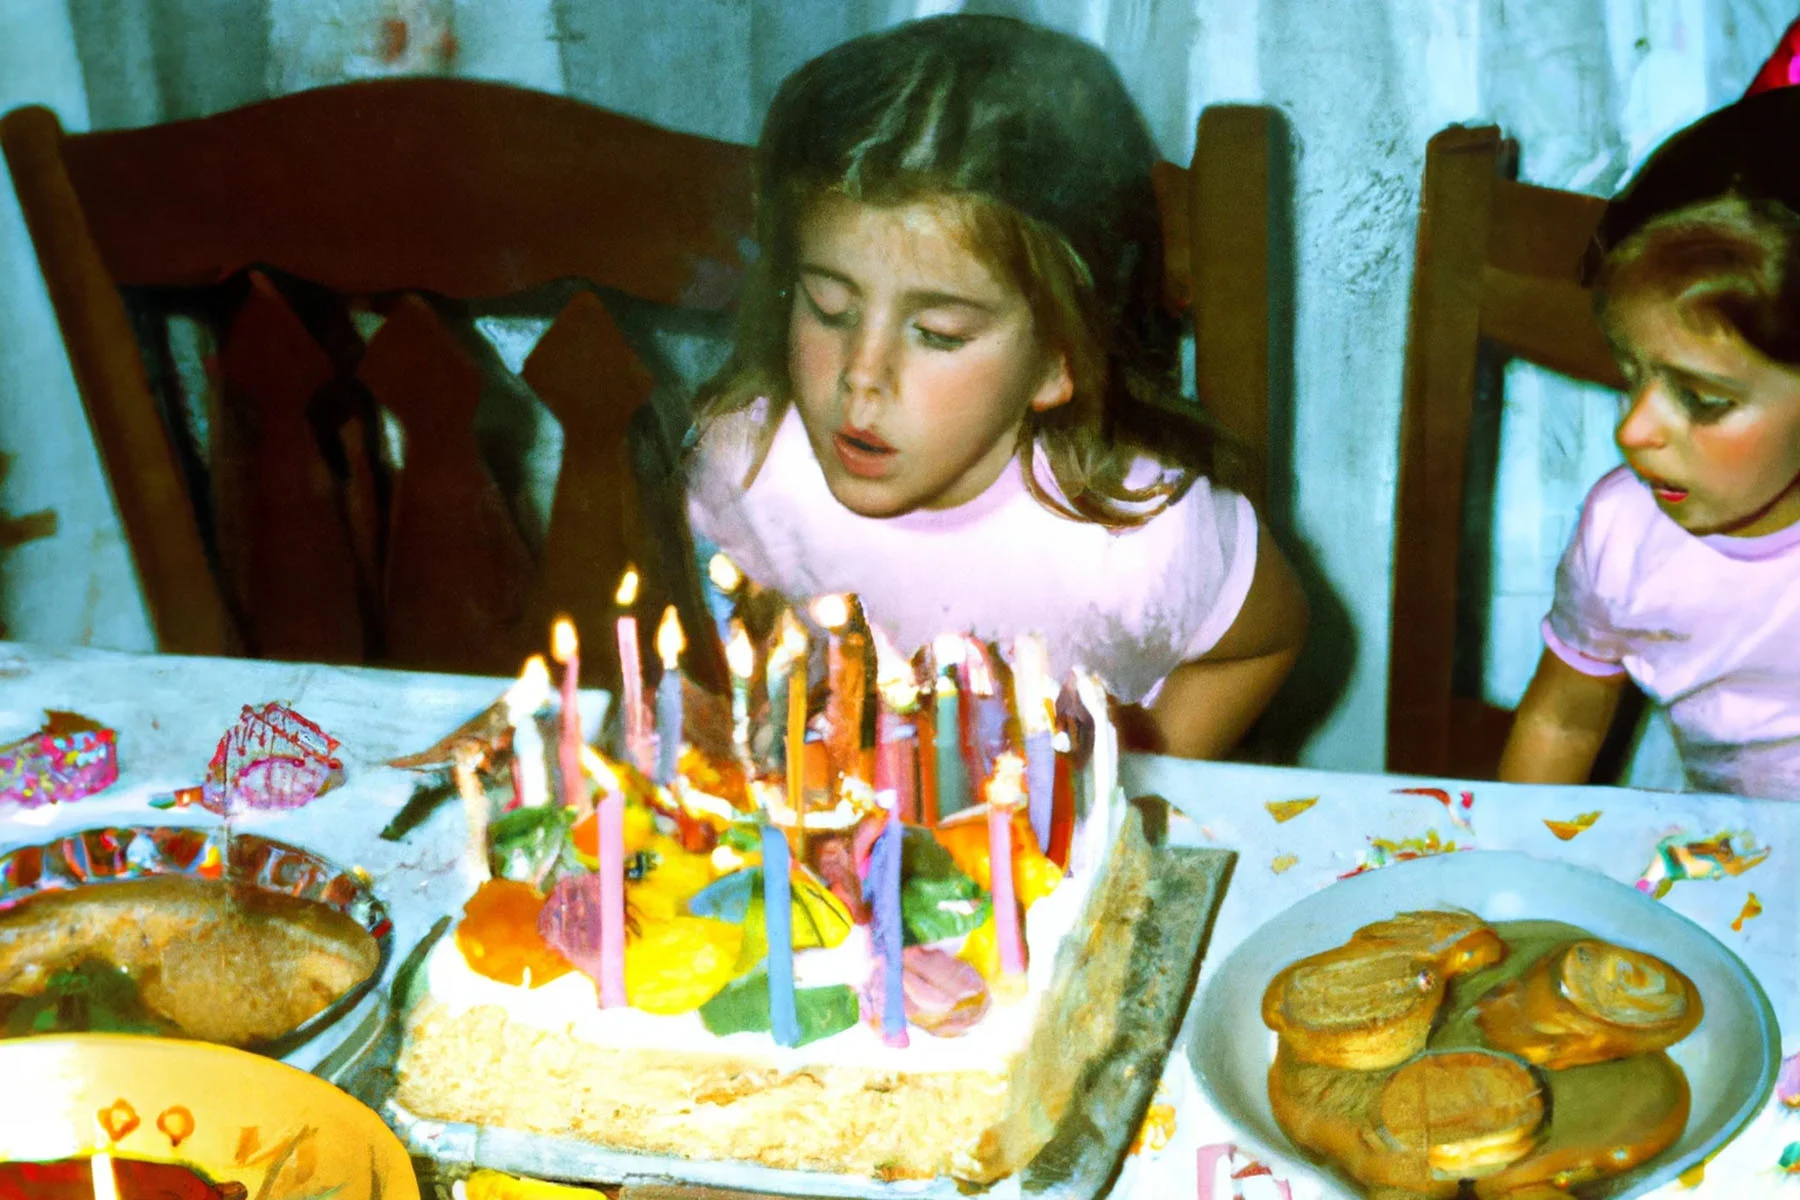 An image that looks like a photograph but is created with the use of Artificial Intelligence. The image has a 90s feel, showing a candid scene of a young girl around the age of 7-8 years old blowing the candles of her birthday cake. She is wearing a pink t-shirt and has dark blond hair. Another little girl sits next to her. 